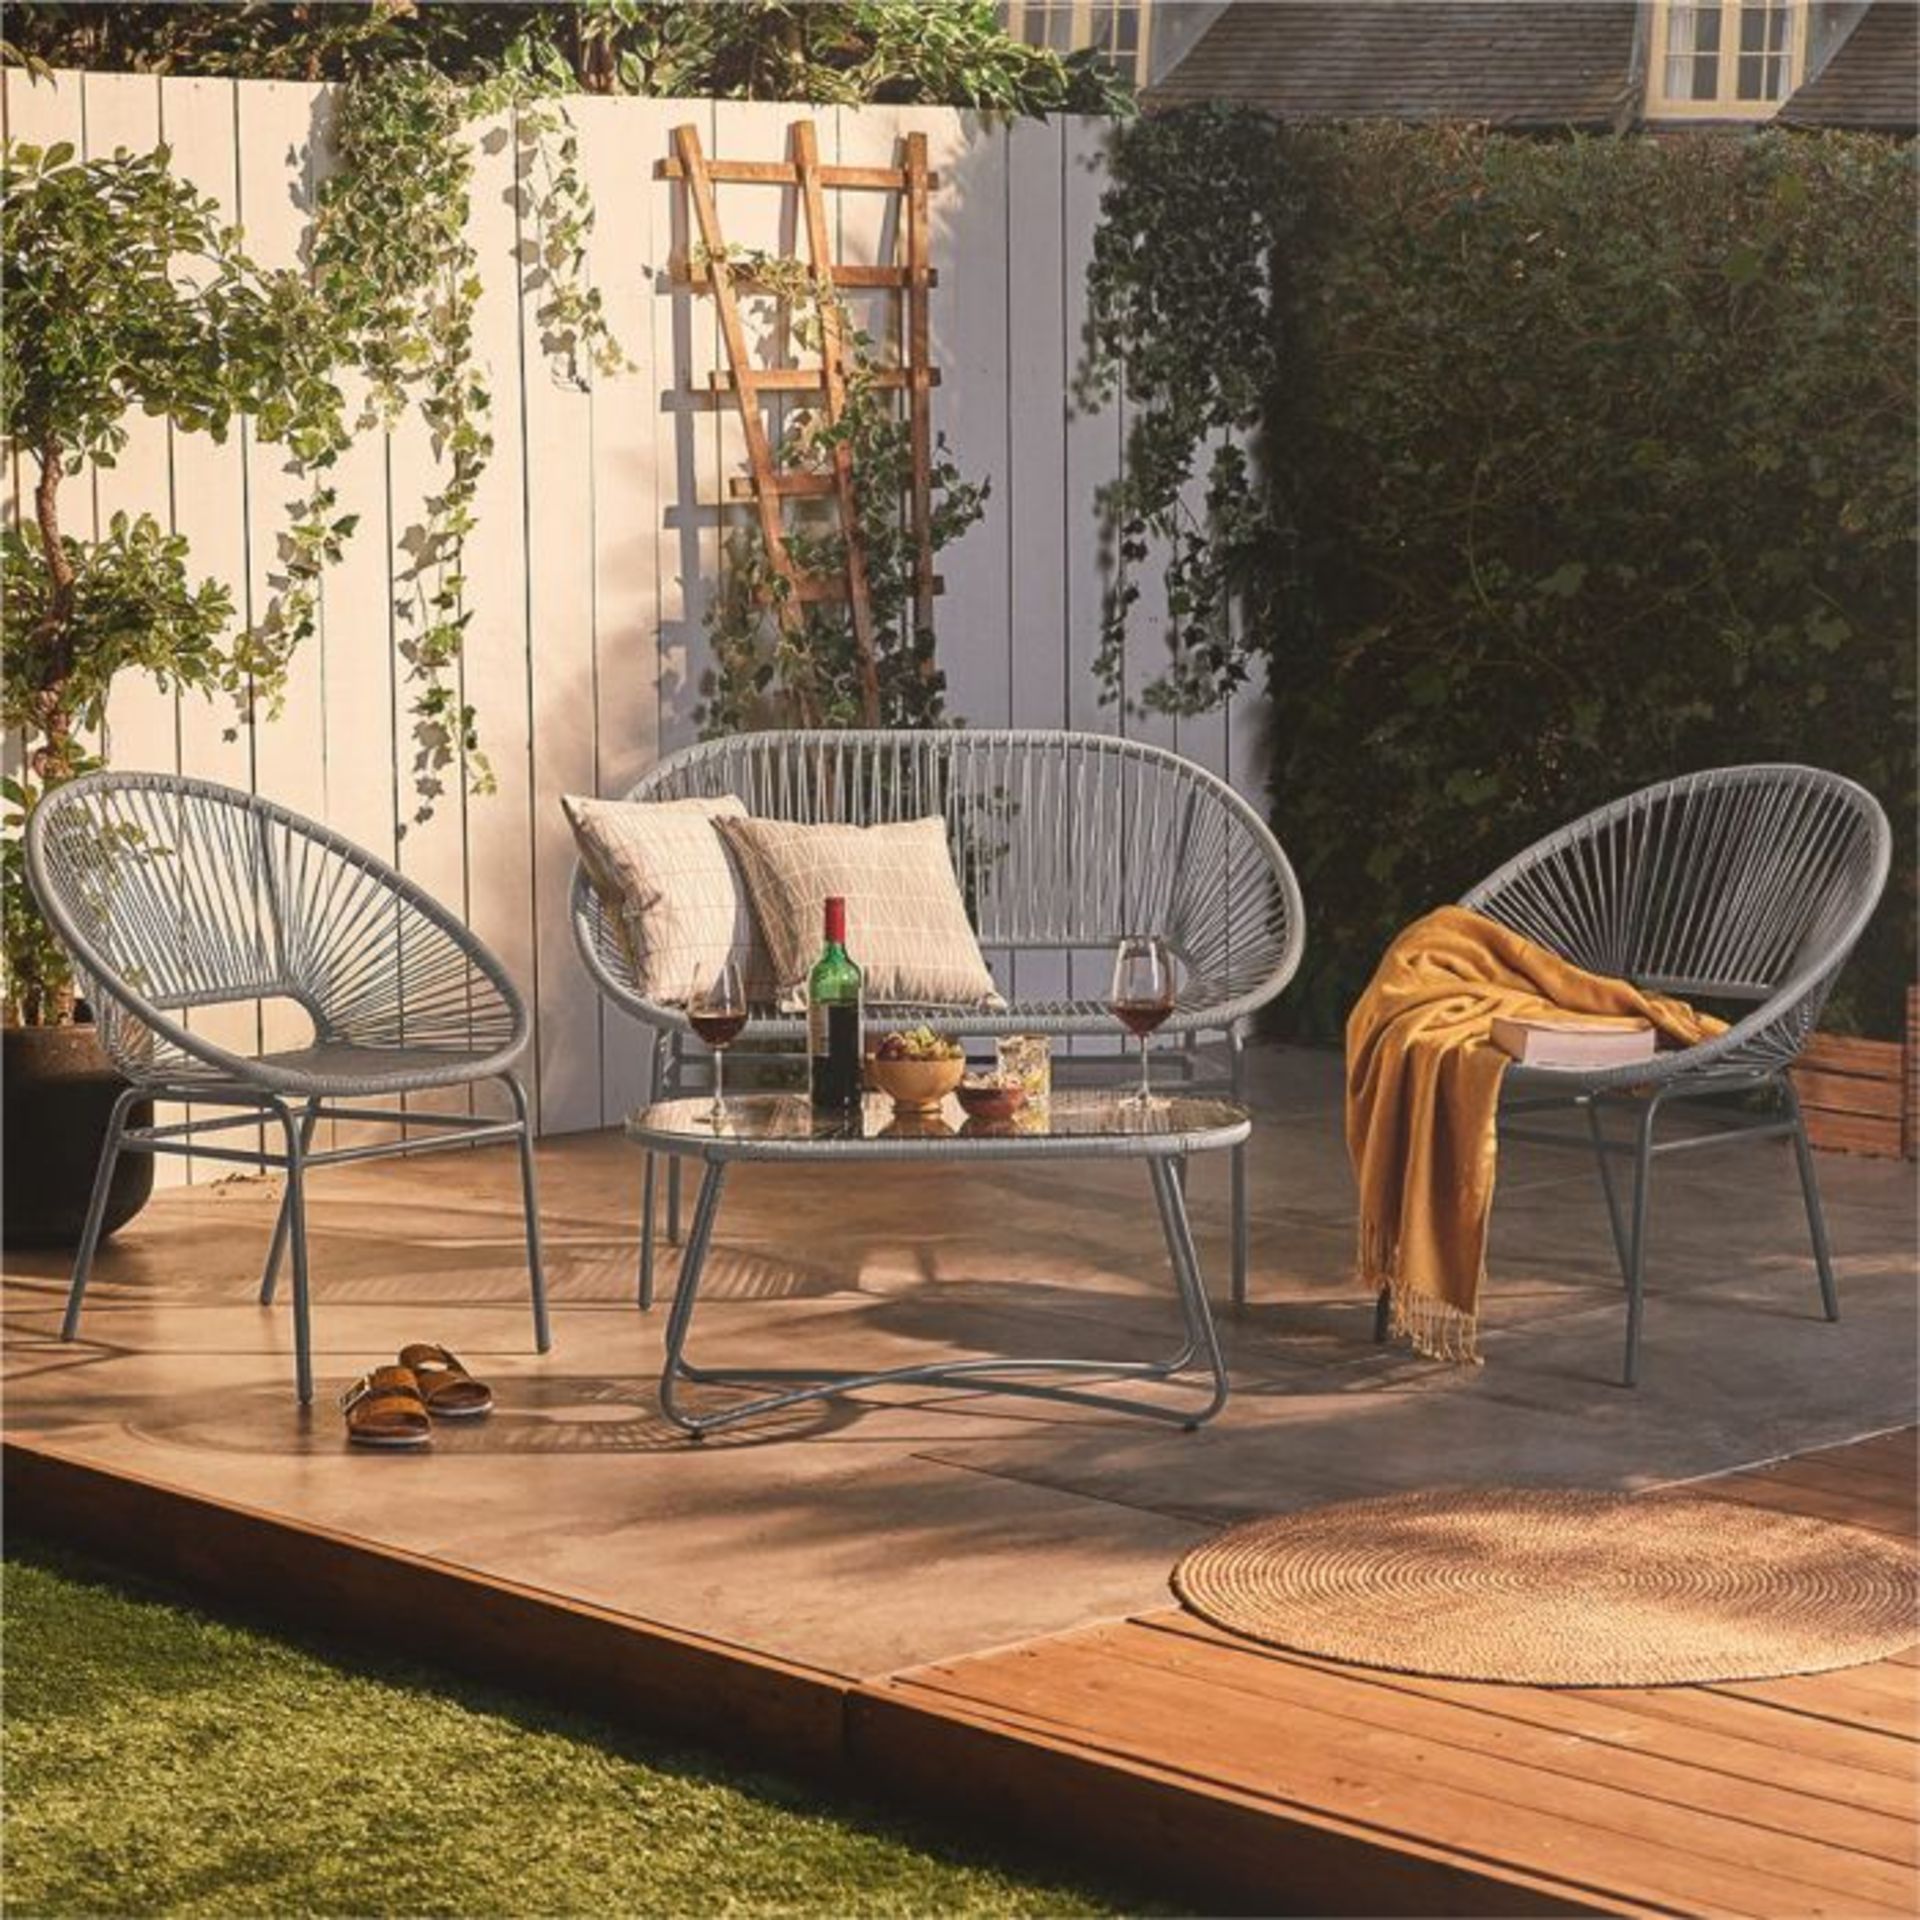 Rattan Sofa and Table Set. The seating area is an important part of any outdoor space, it brings - Image 2 of 3